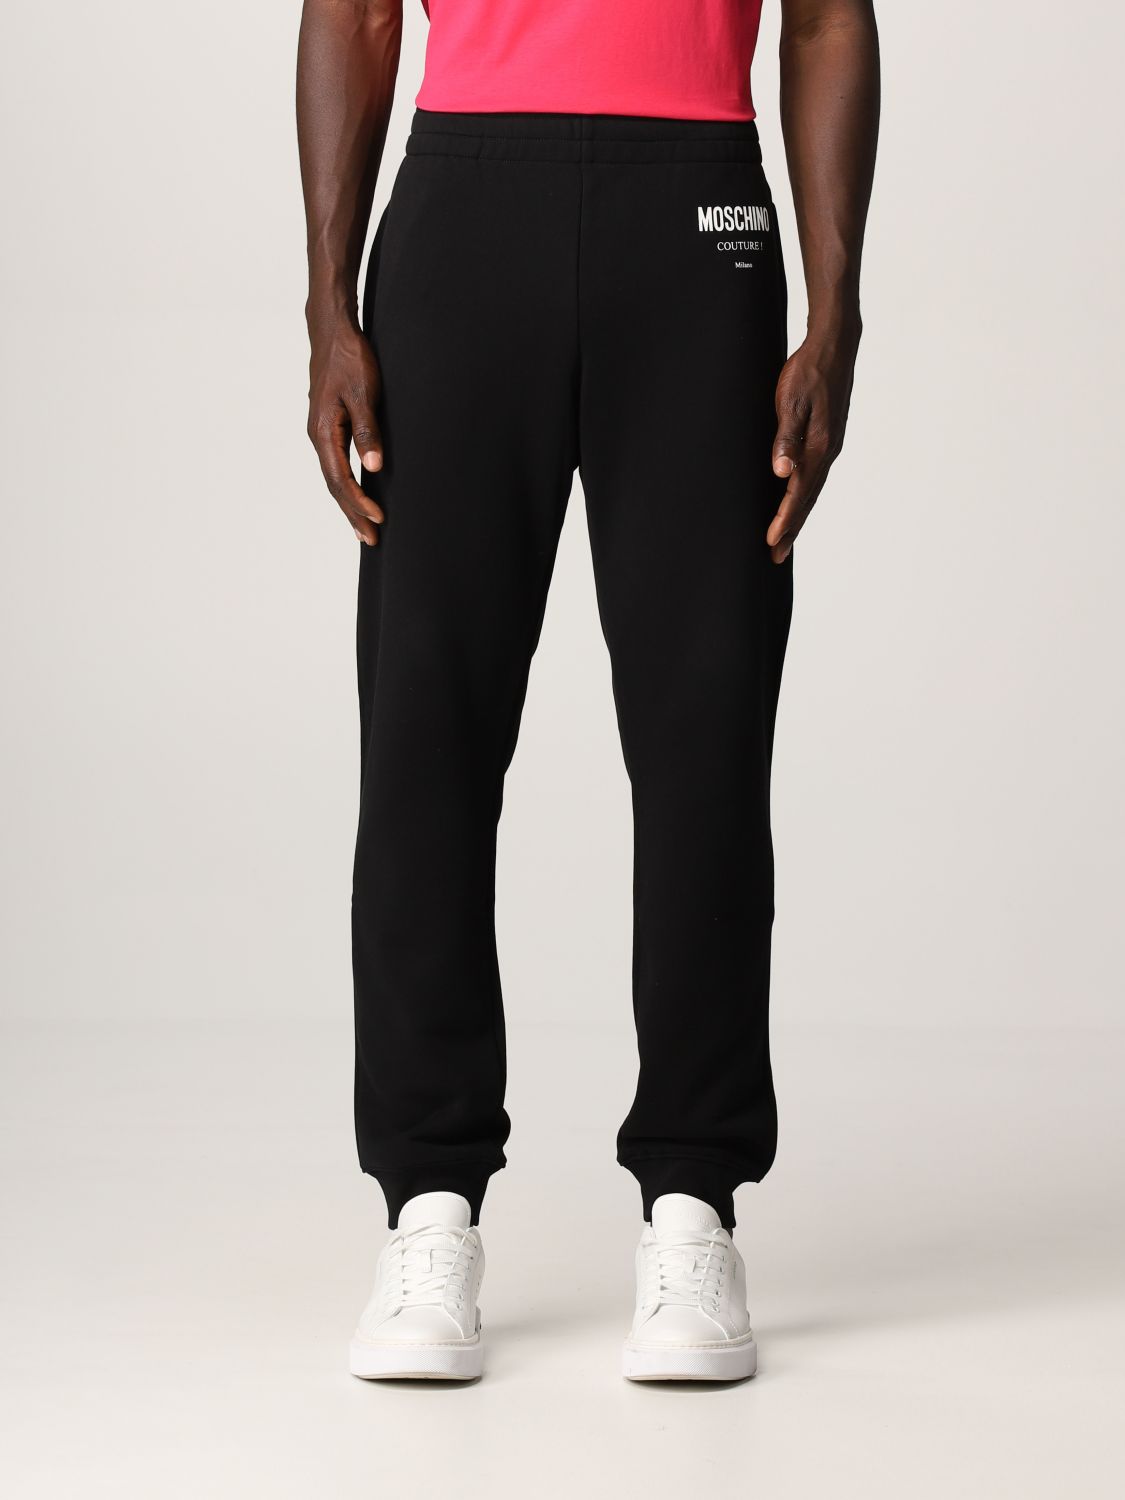 MOSCHINO COUTURE: cotton jogging pants - Black | Moschino Couture pants ...